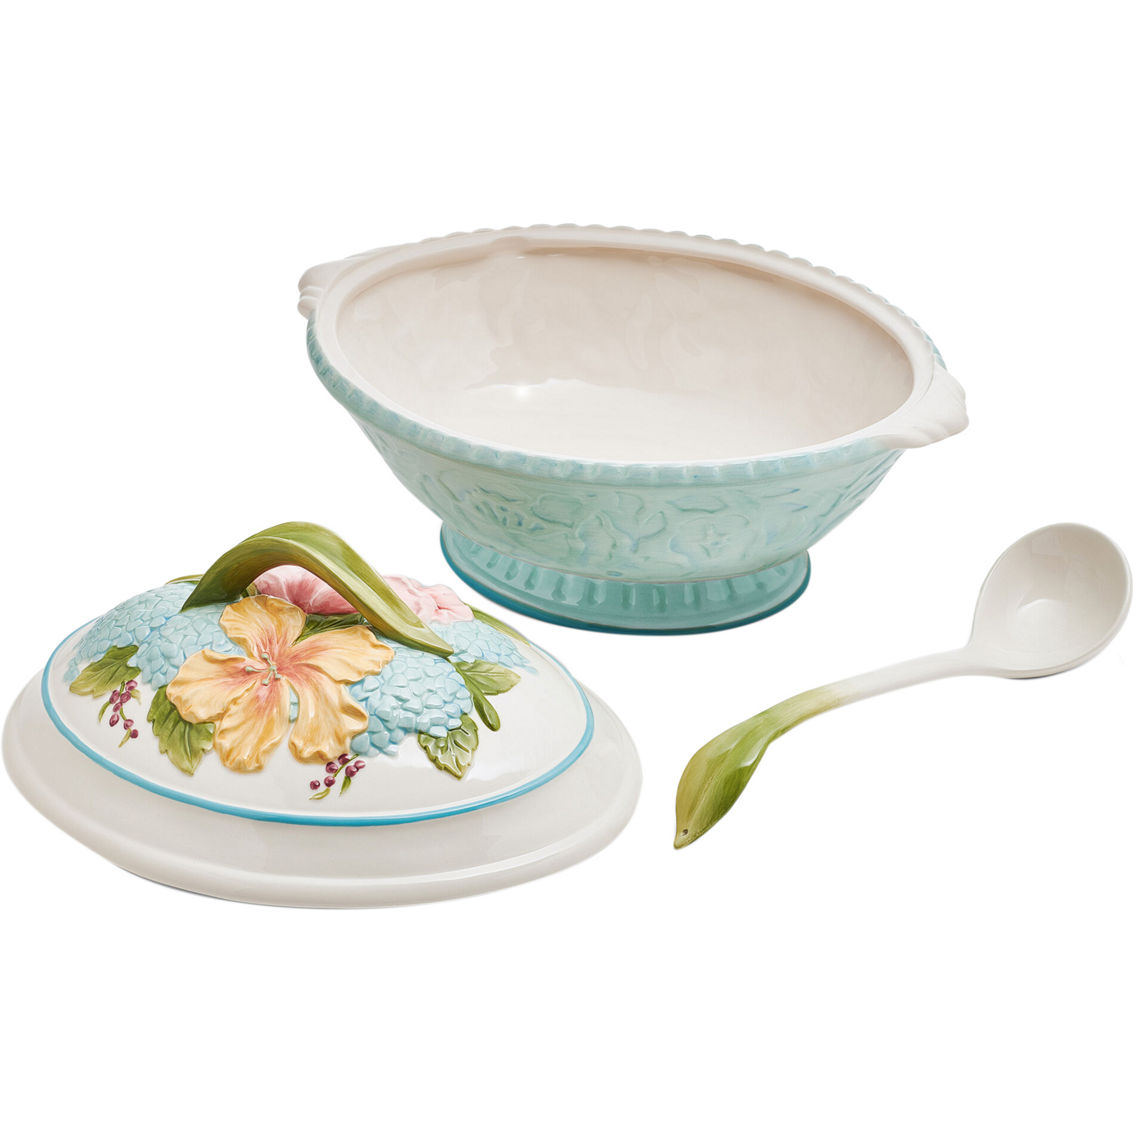 Fitz and Floyd Meadow 14.75 in. Soup Tureen with Ladle - Image 4 of 5